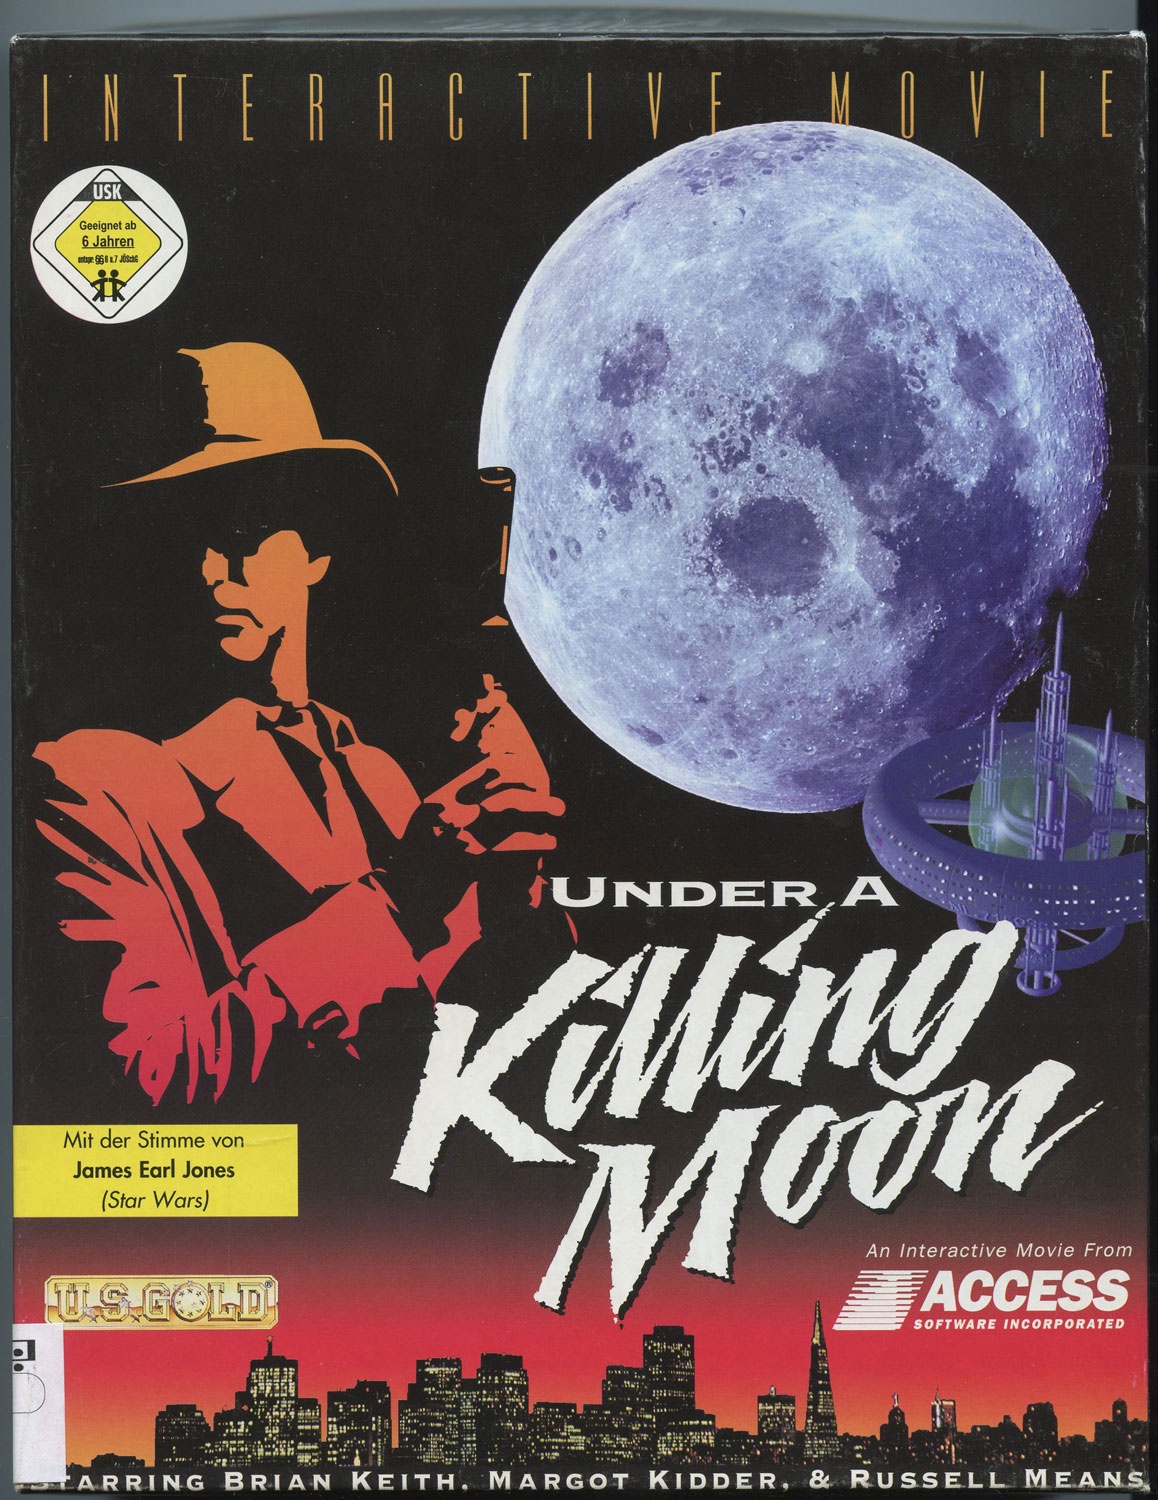 Under a killing Moon : Interactive Movie (Computerspielemuseum Berlin CC BY-NC-SA)